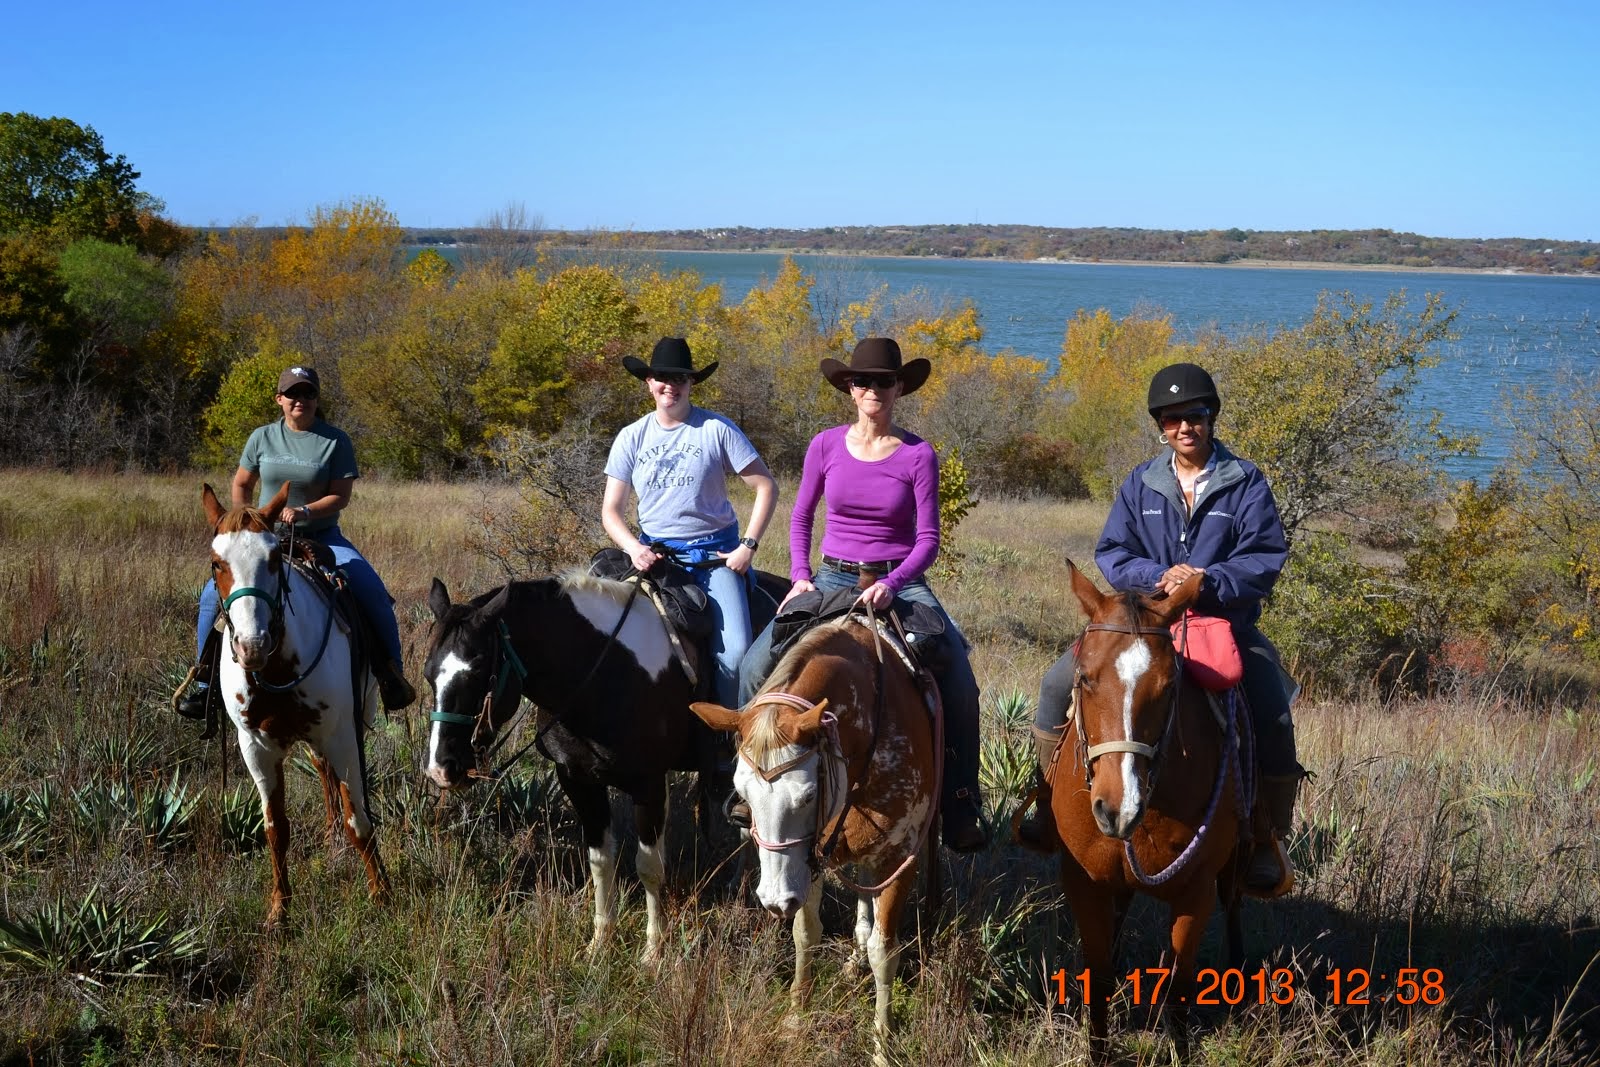 2013-Look at them cowgirls in Texas!